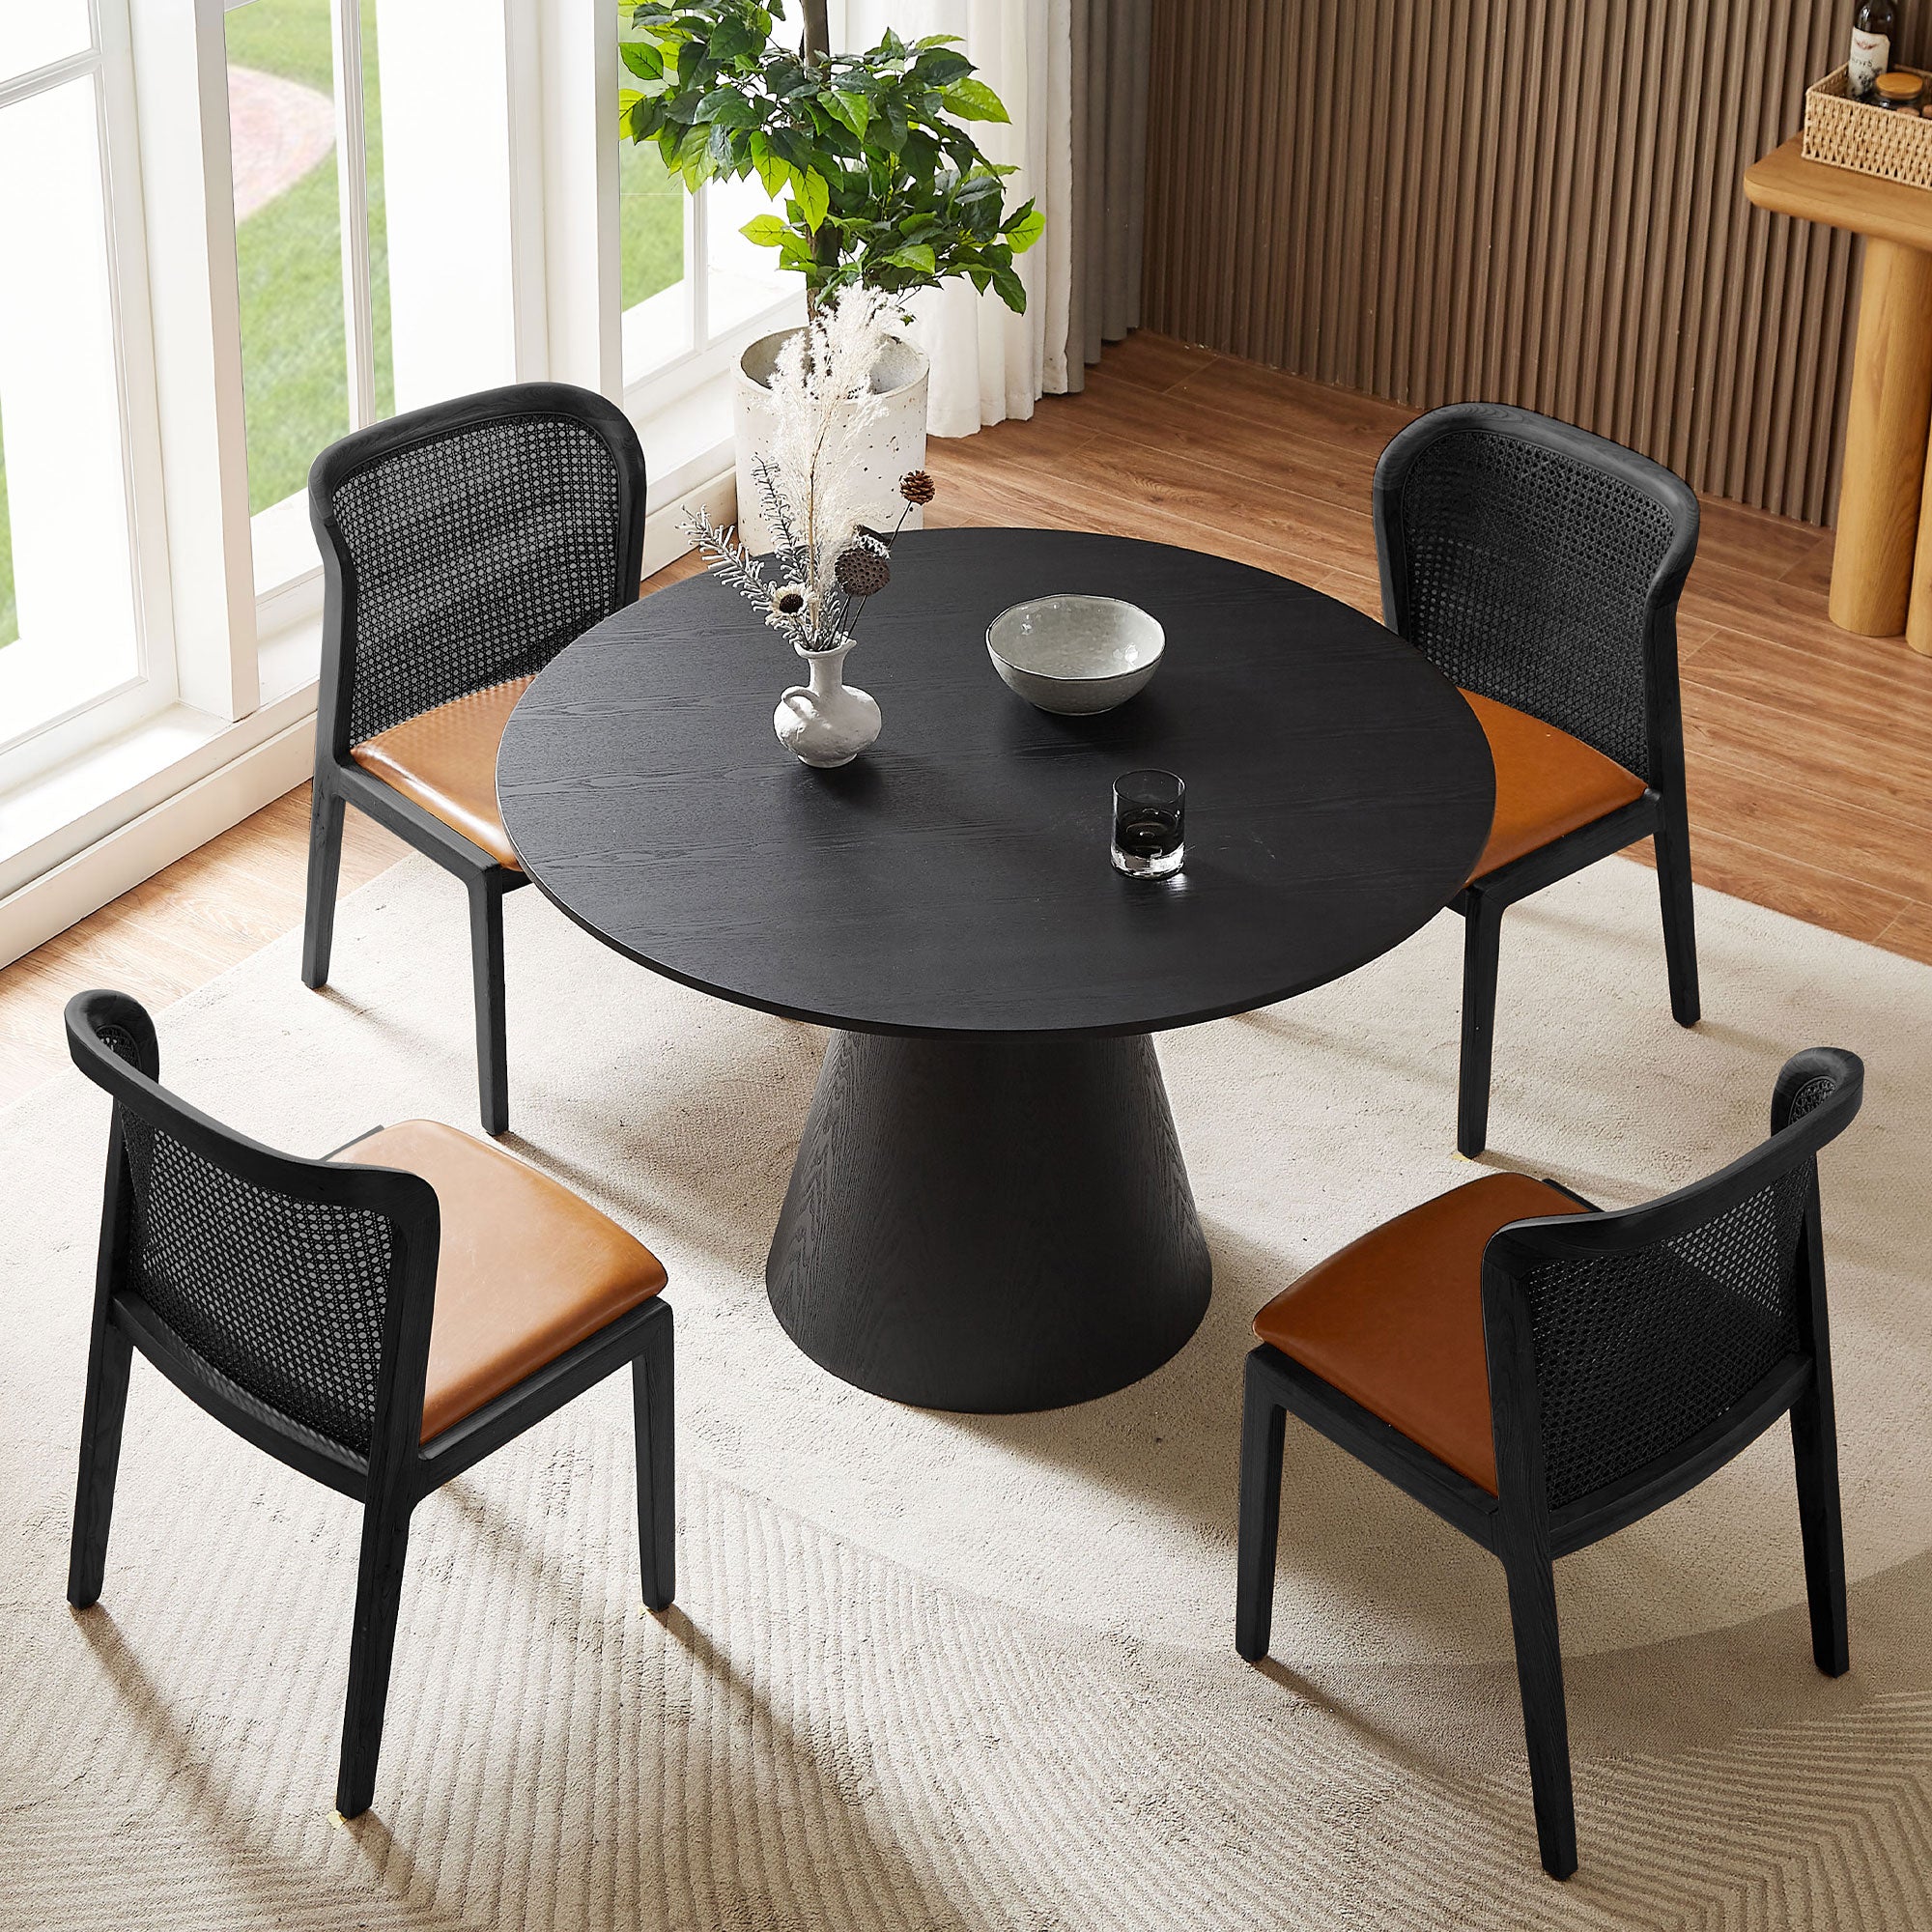 47.24'' Round Dining Table, Modern Kitchen Table